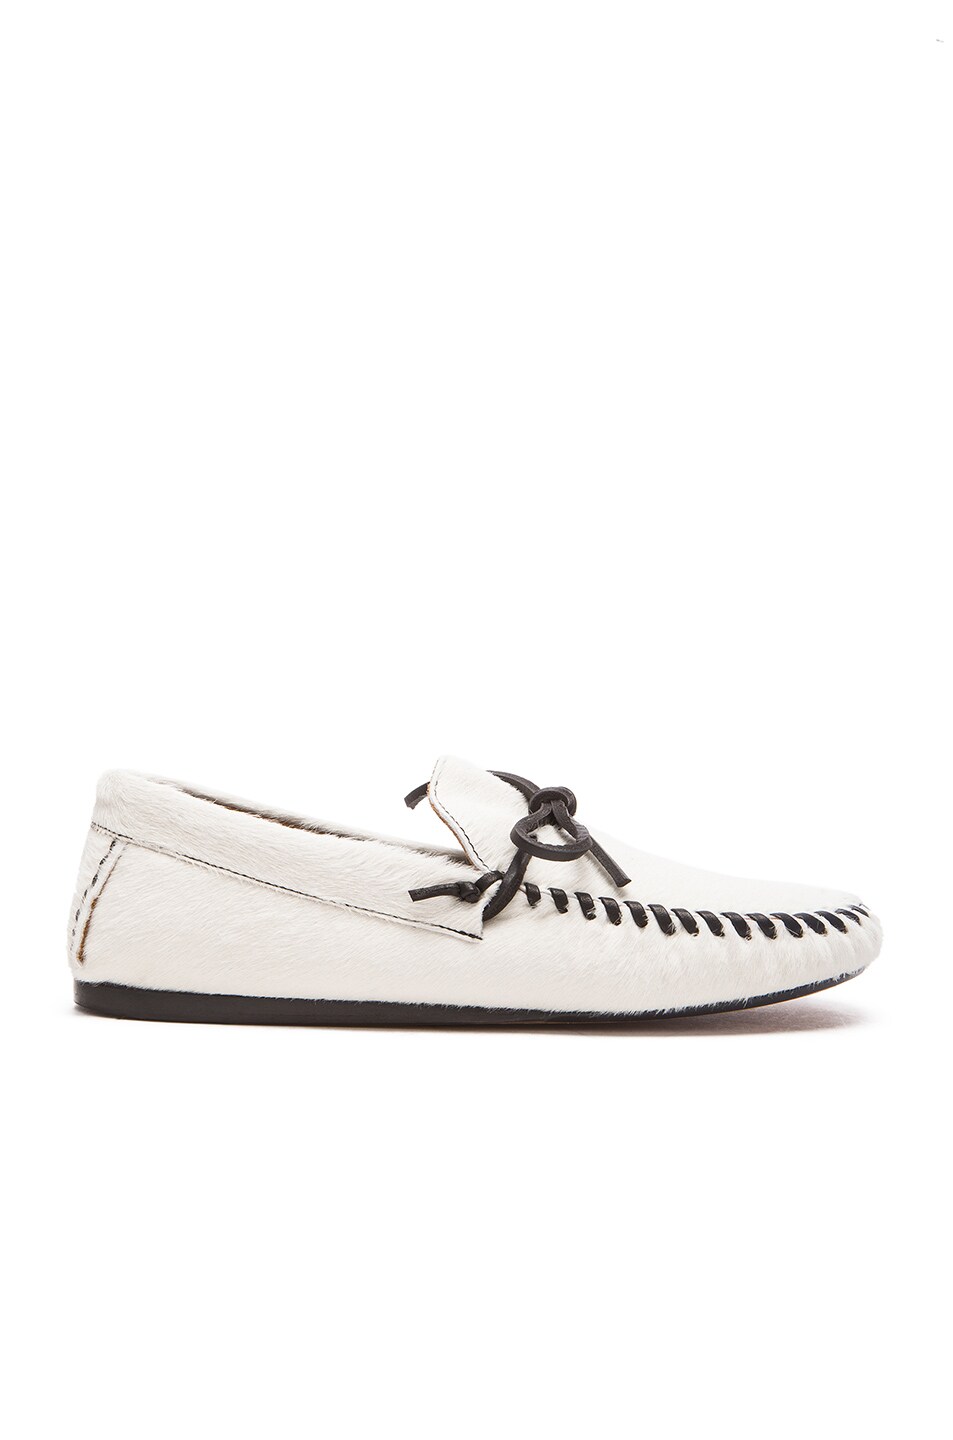 Image 1 of Isabel Marant Etoile Fodih Calf Hair Moccasins in White